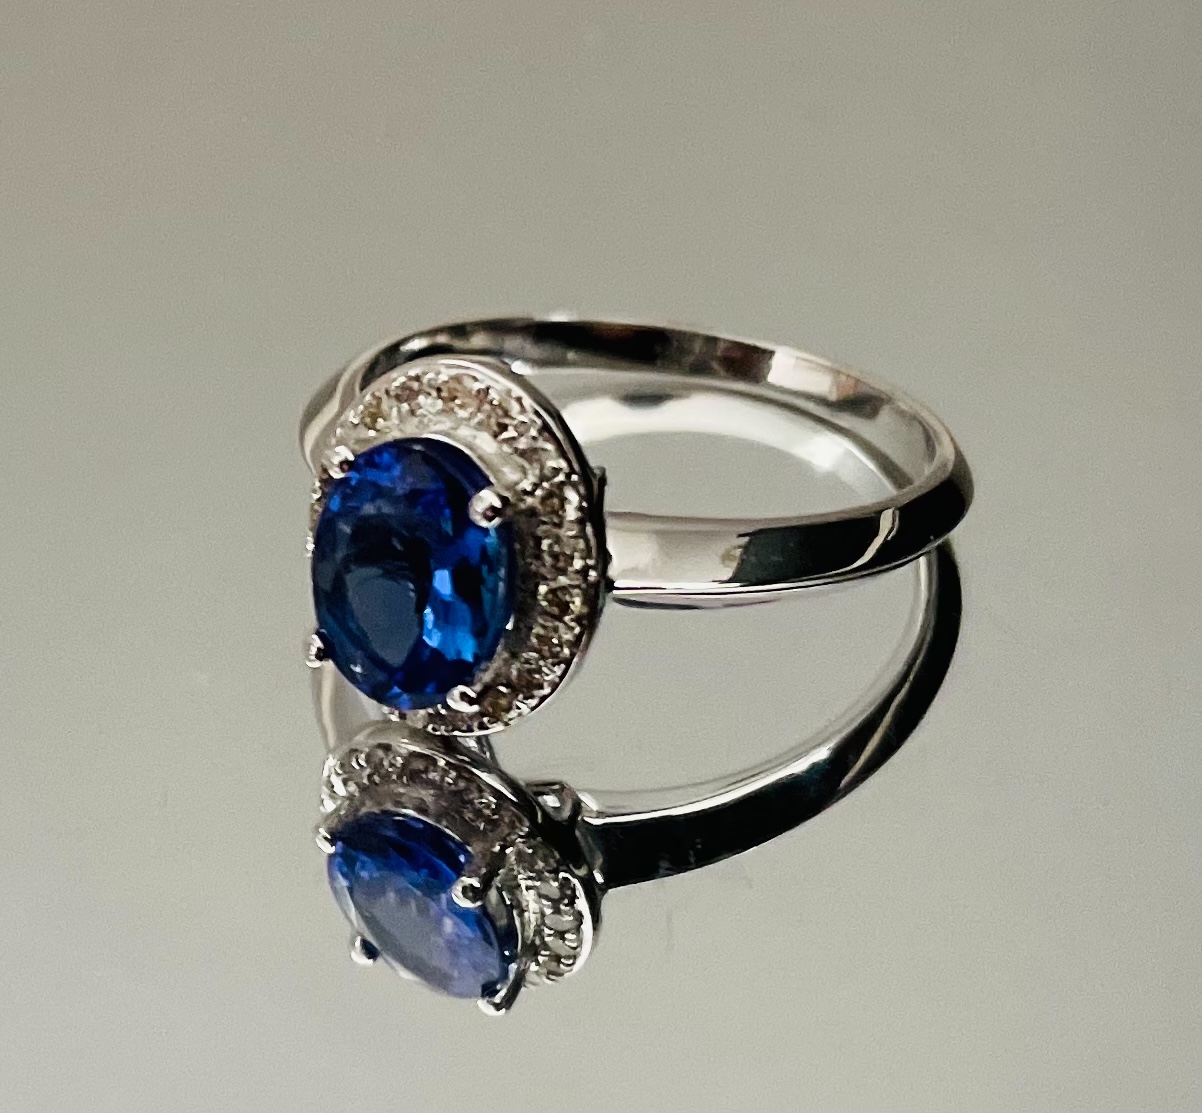 Beautiful Natural Tanzanite Ring With Diamonds And 18k Gold - Image 3 of 5